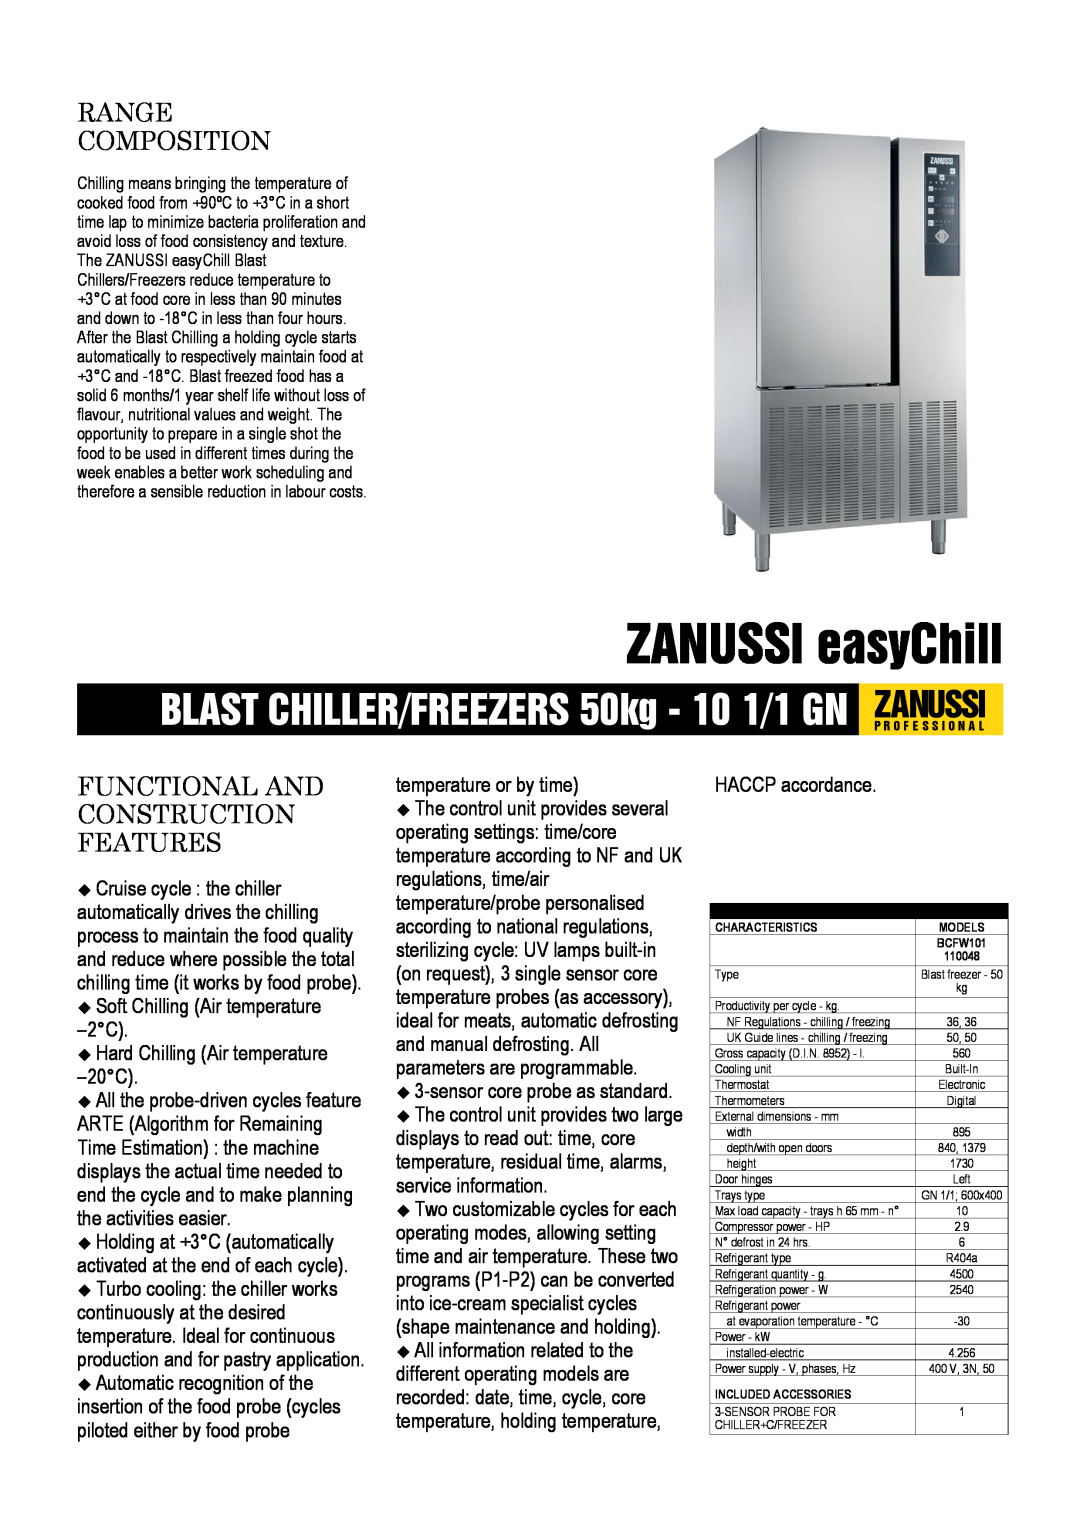 Zanussi 110048, BCFW101 dimensions ZANUSSI easyChill, Range Composition, Functional And Construction Features 